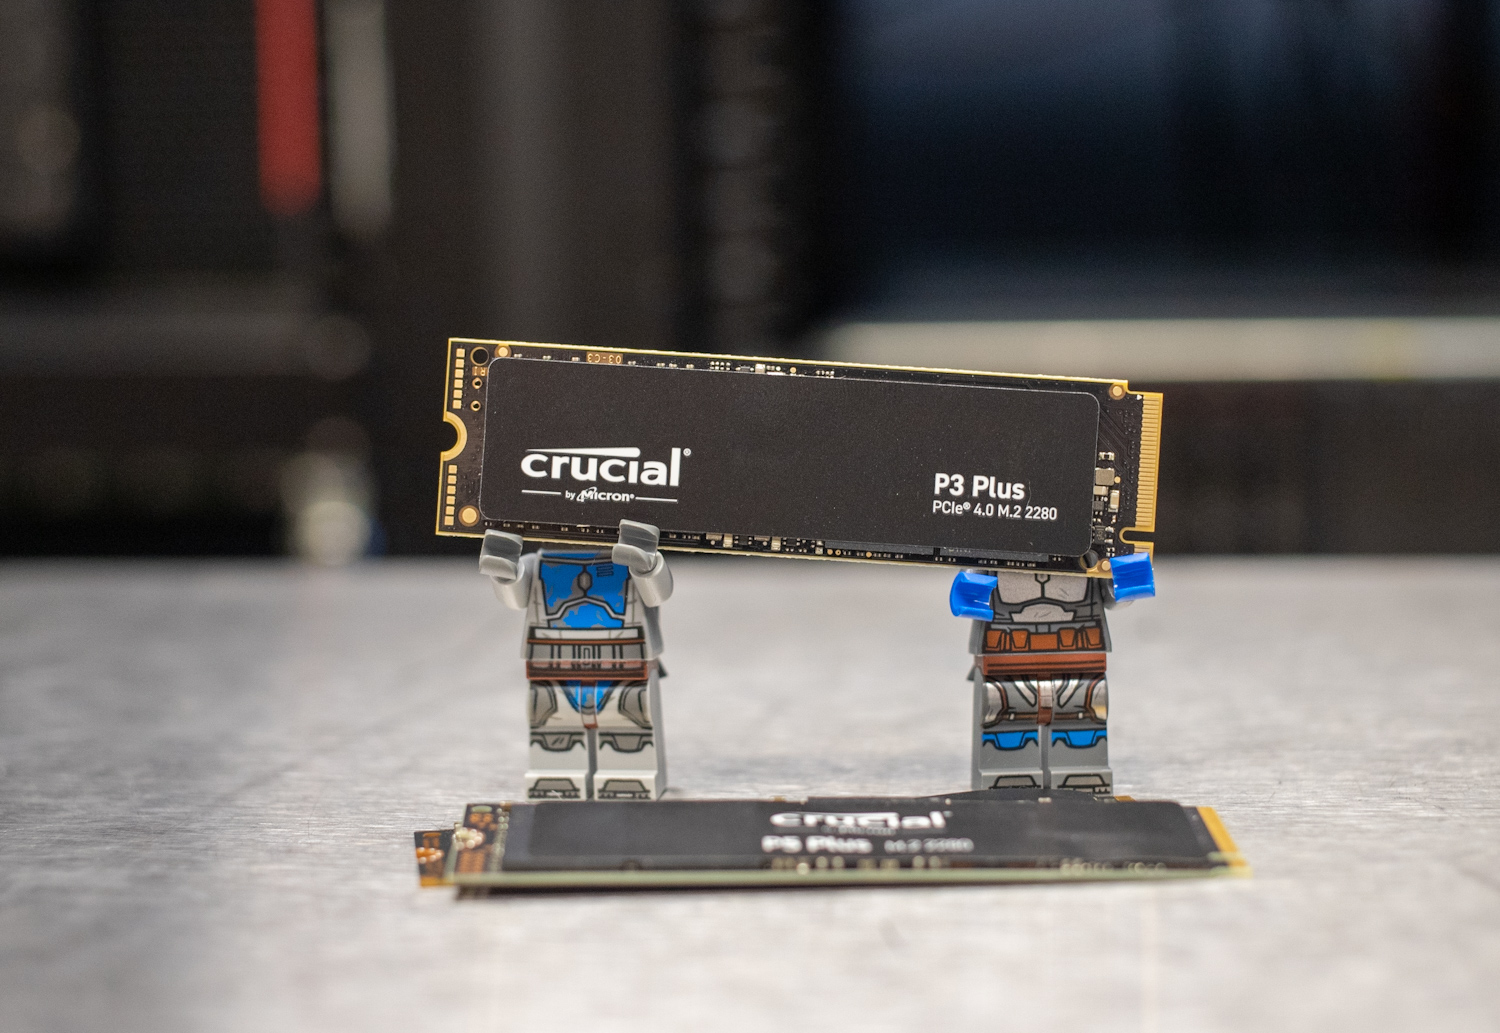 Crucial P5 Plus 1TB NVMe PCIe Gen4 SSD Review - Page 2 of 3 - ServeTheHome